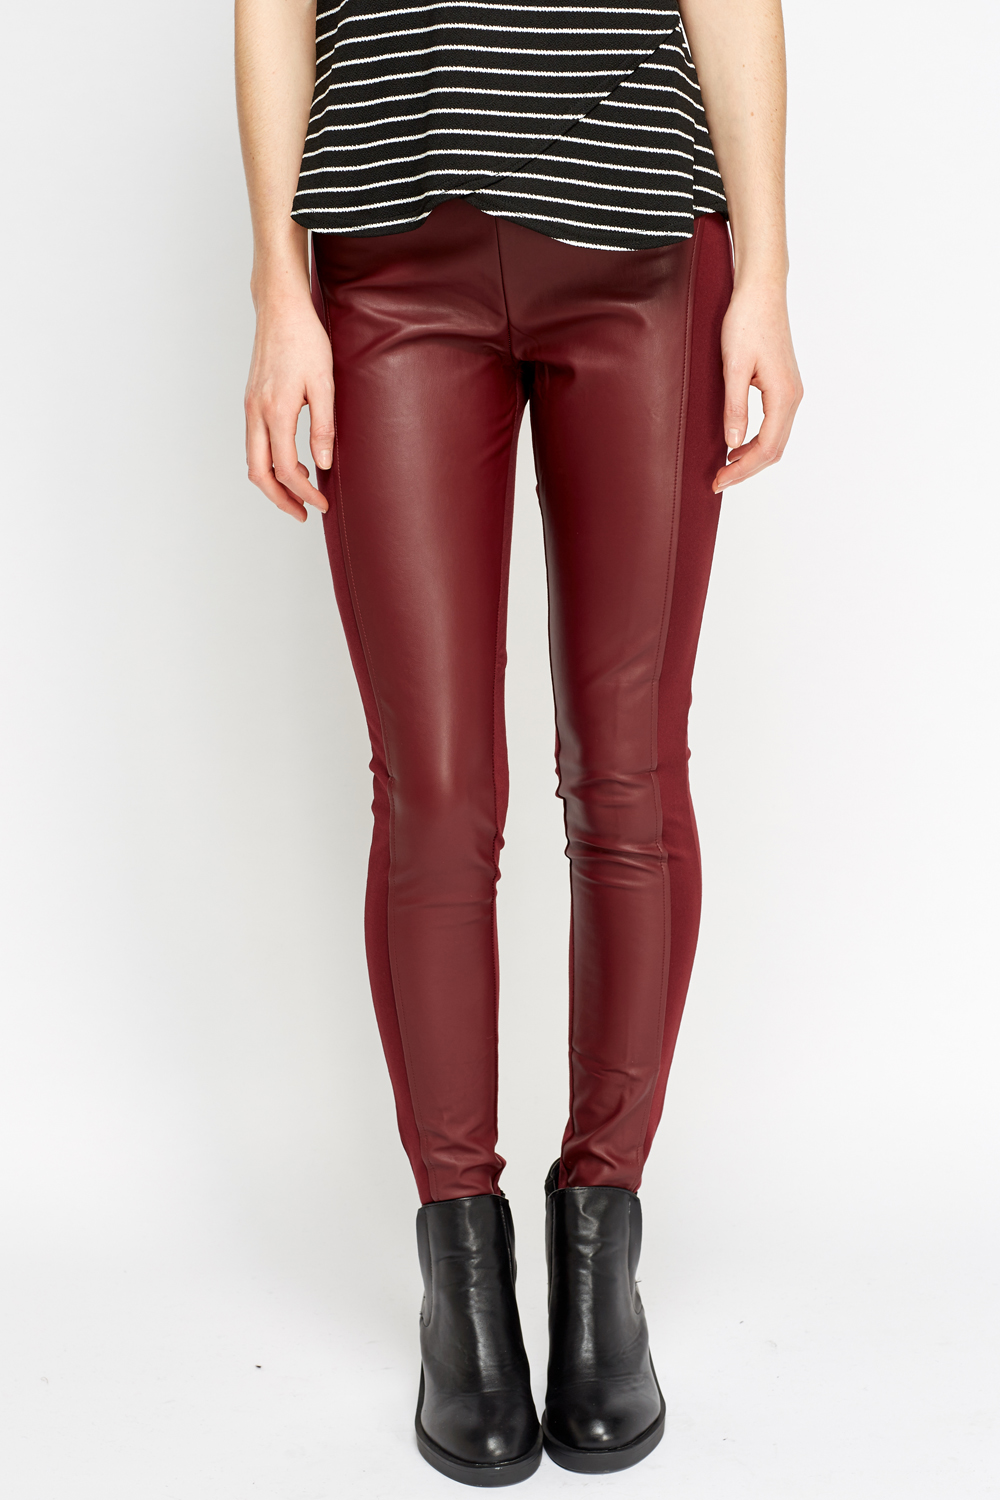 Faux Leather Contrast Wine Leggings - Just $4